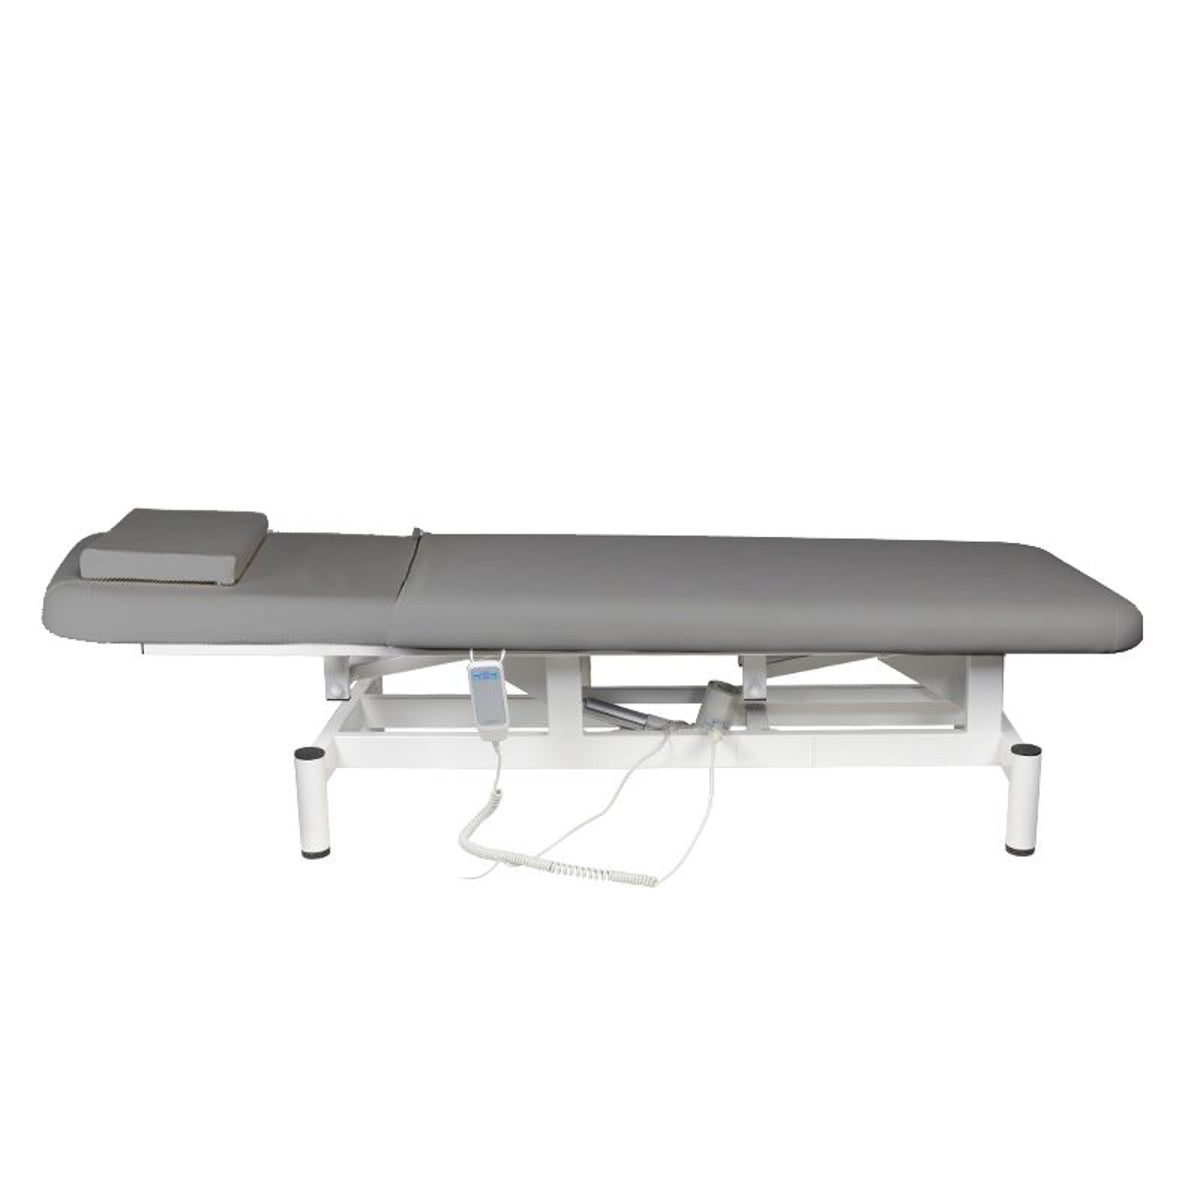 ACTIVESHOP Electric bed massage 079 1 intens. Gray